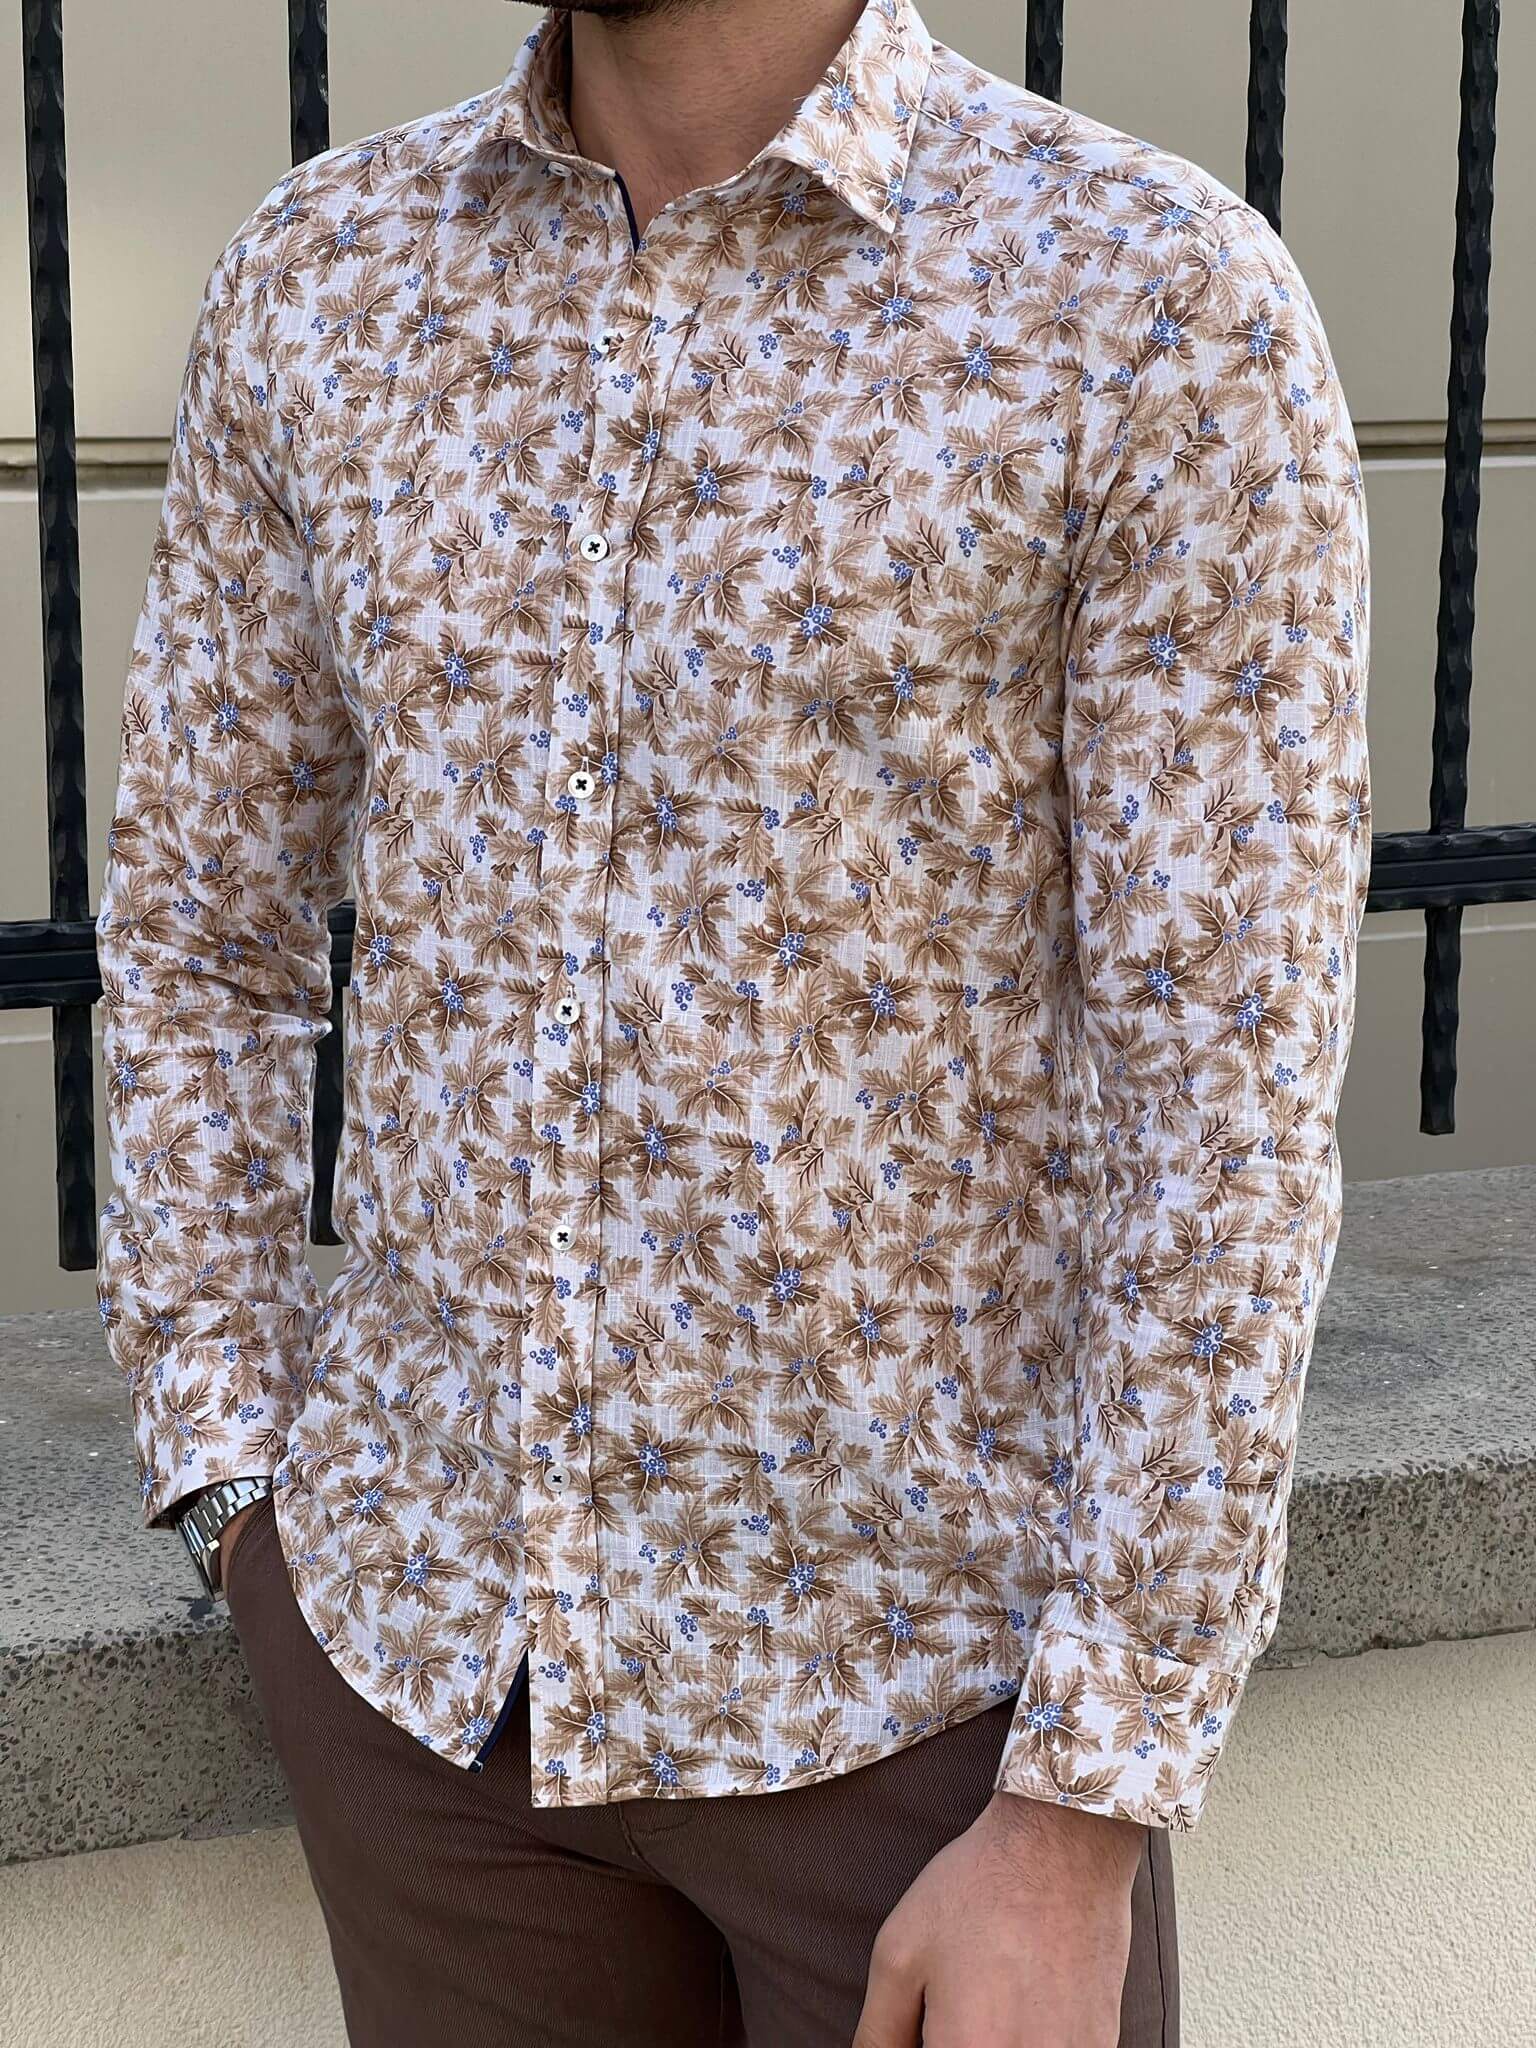 A comfortable and elegant floral beige cotton shirt for any occasion